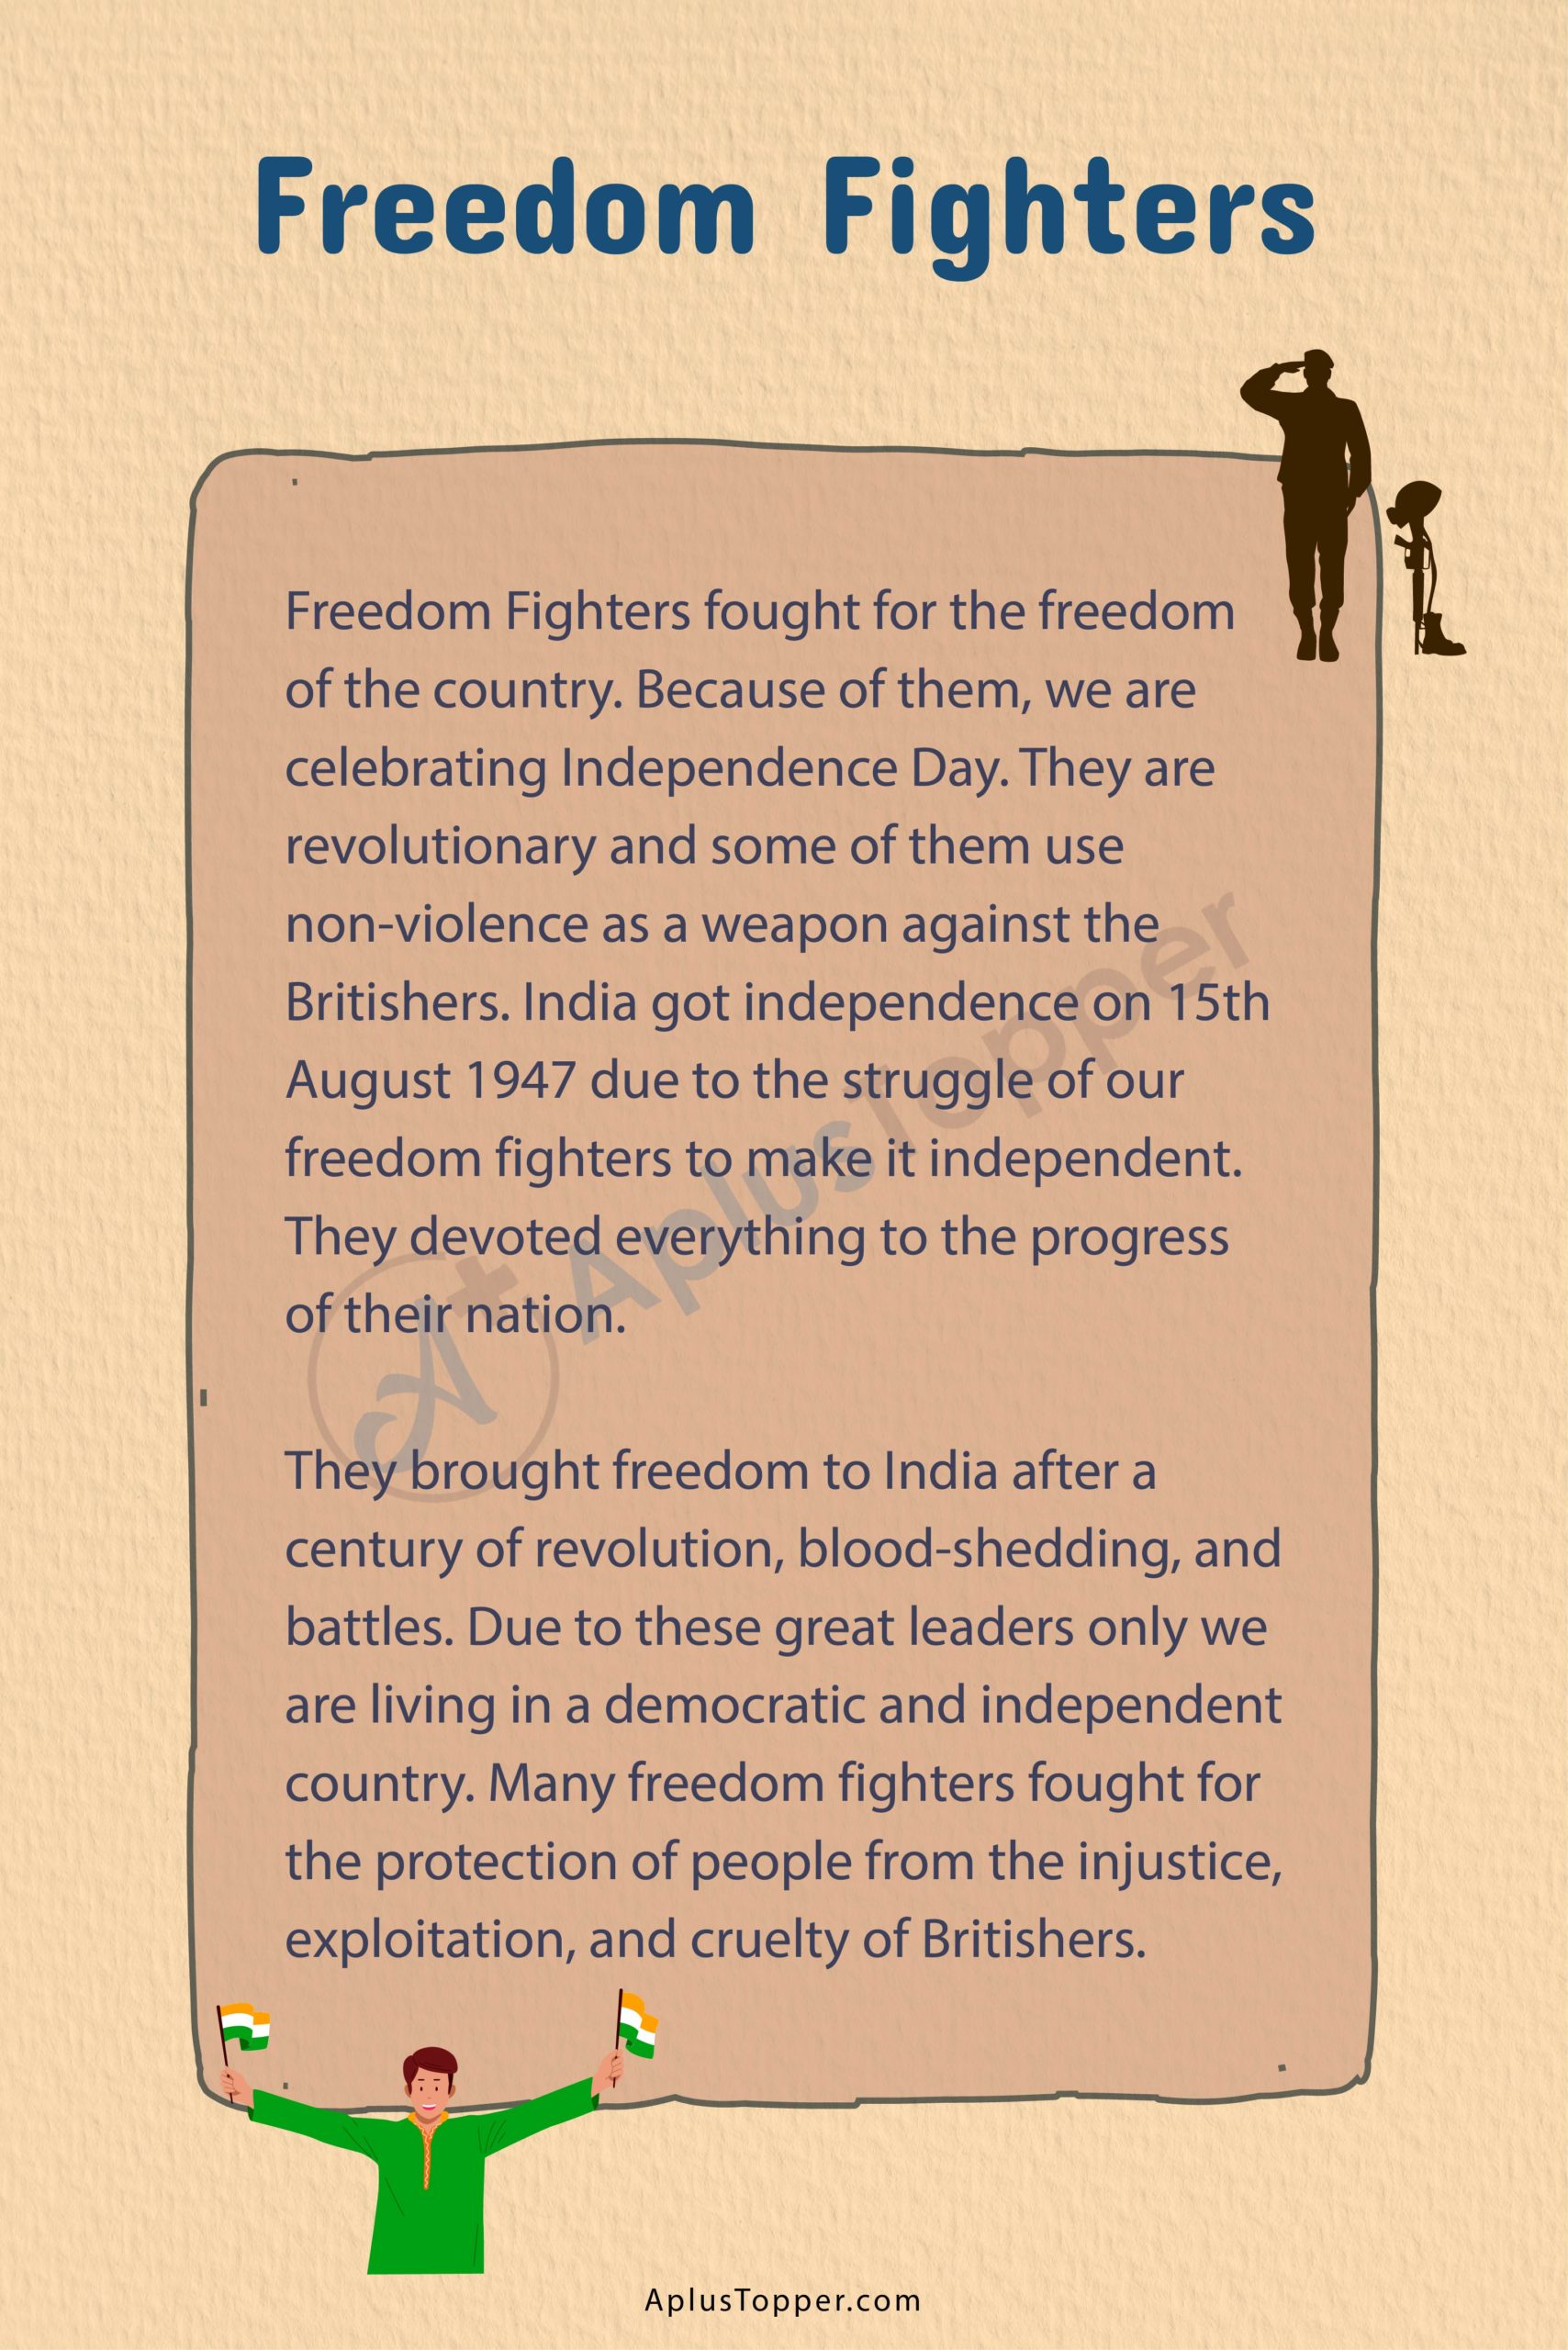 essay writing on freedom fighters in english